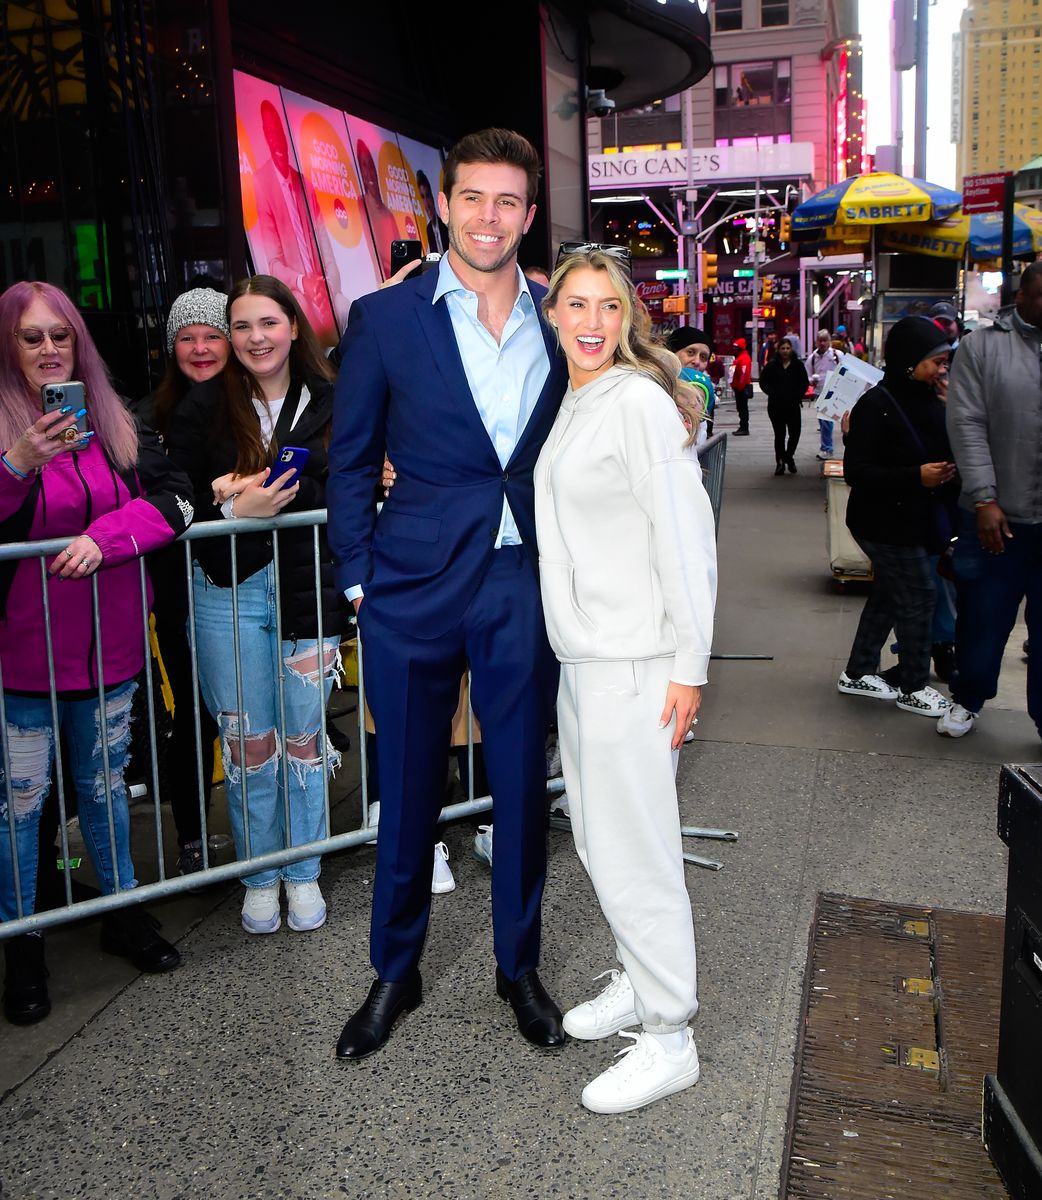 <p>The newest addition to the growing list of Bachelor Nation couples is also one of the cutest. Zach Shallcross and Kaity Biggar met during Zach's season (season 27) of <em>The Bachelor.</em> If you avidly watched their season, you'll know Zach and Kaity both call Austin, Texas home. </p><p>They're still very happily engaged, but haven't moved in together quite yet. "We're basically like a fully married couple we just haven't officially moved in yet," Zach said in May 2023 on the <a href="https://go.redirectingat.com?id=74968X1553576&url=https%3A%2F%2Fpodcasts.apple.com%2Fus%2Fpodcast%2Fhappily-ever-after-with-zach-shallcross-and-kaity-biggar%2Fid1238355247%3Fi%3D1000613641900&sref=https%3A%2F%2Fwww.womenshealthmag.com%2Flife%2Fg30430060%2Fbachelor-couples-still-toogether%2F"><em>Almost Famous</em></a> podcast. </p>